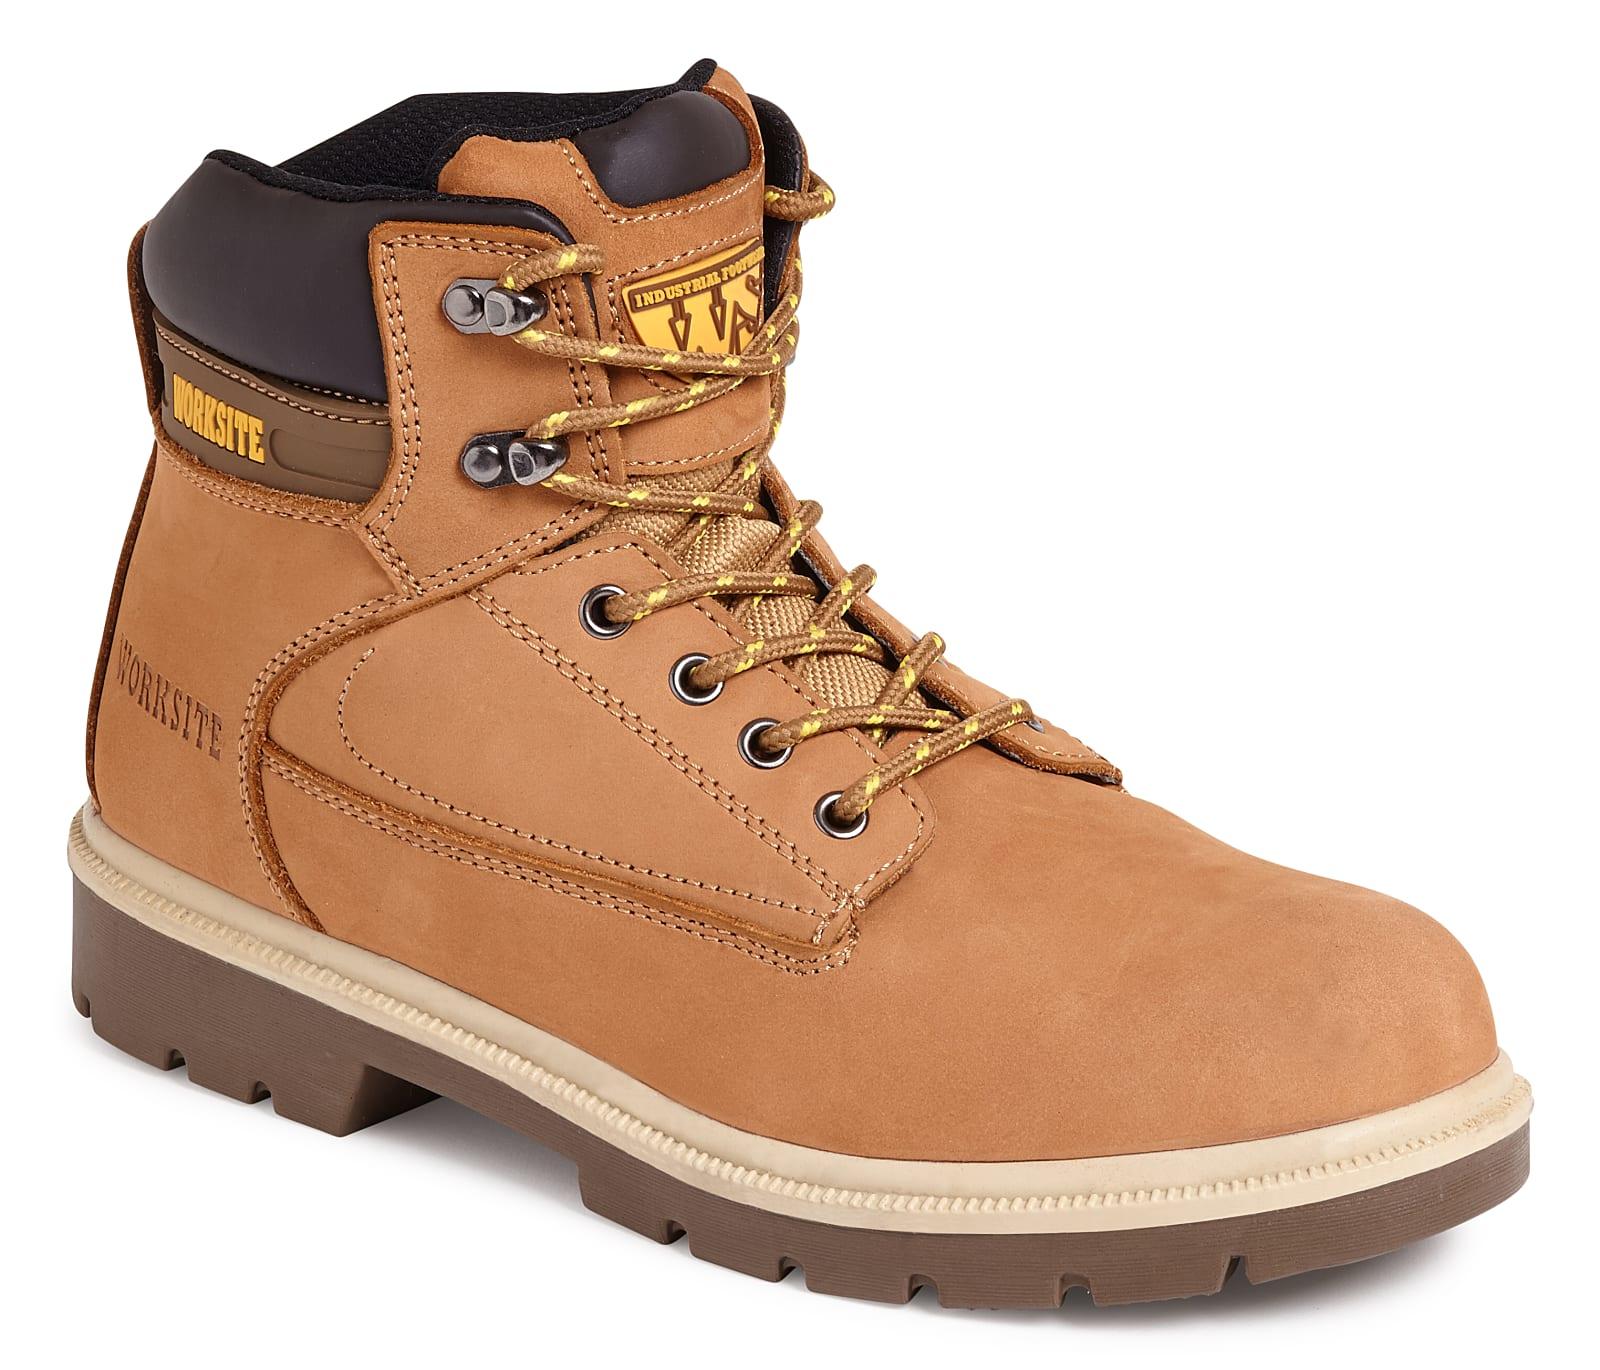 Worksite SS613SM Safety Boots in Beige (Product Code: SS613SM)